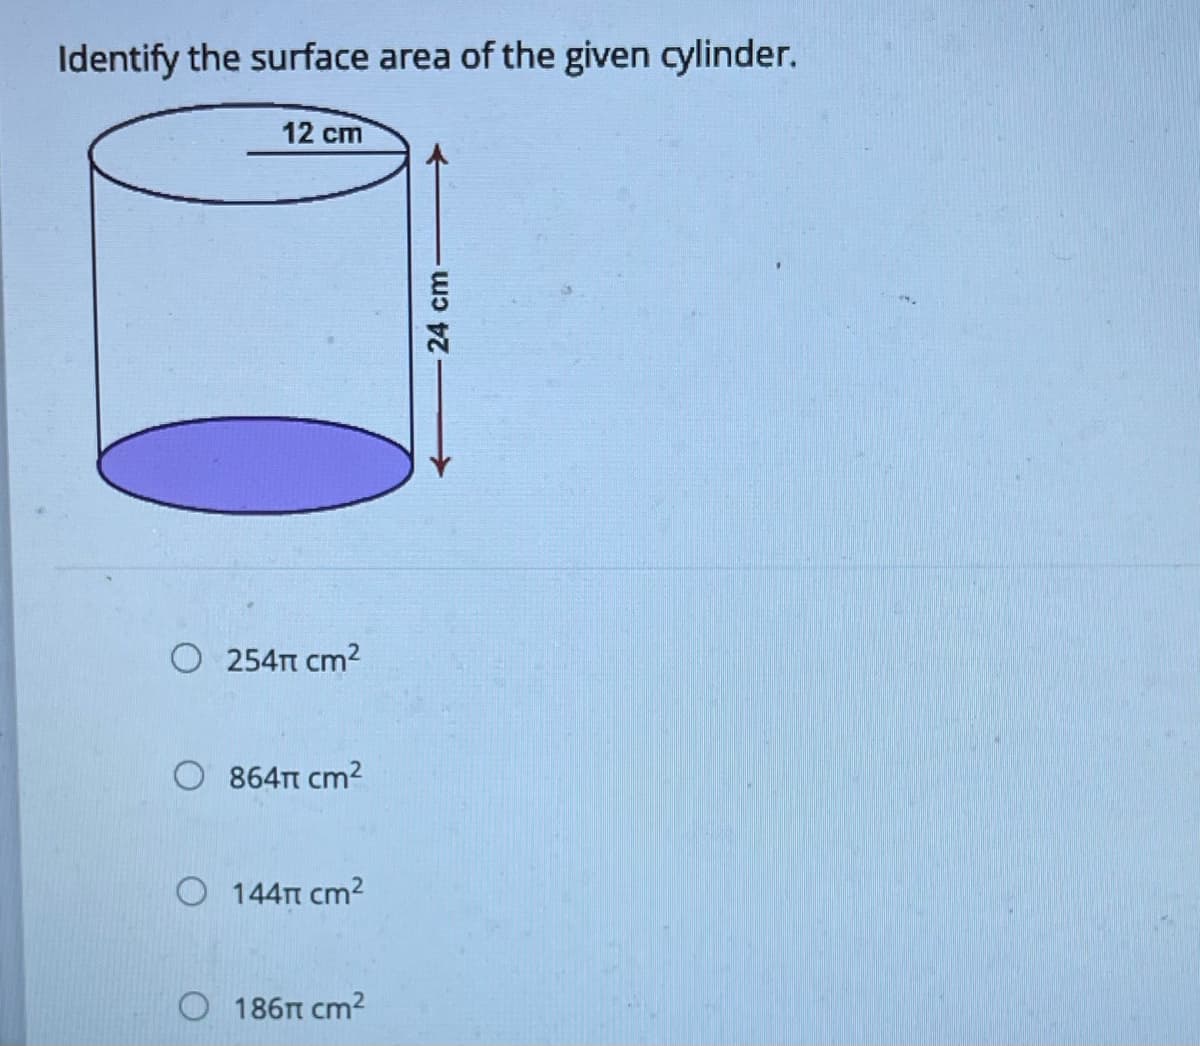 Identify the surface area of the given cylinder.
12 cm
O 254T cm2
O 864t cm2
O 144n cm2
186n cm2
24 cm
